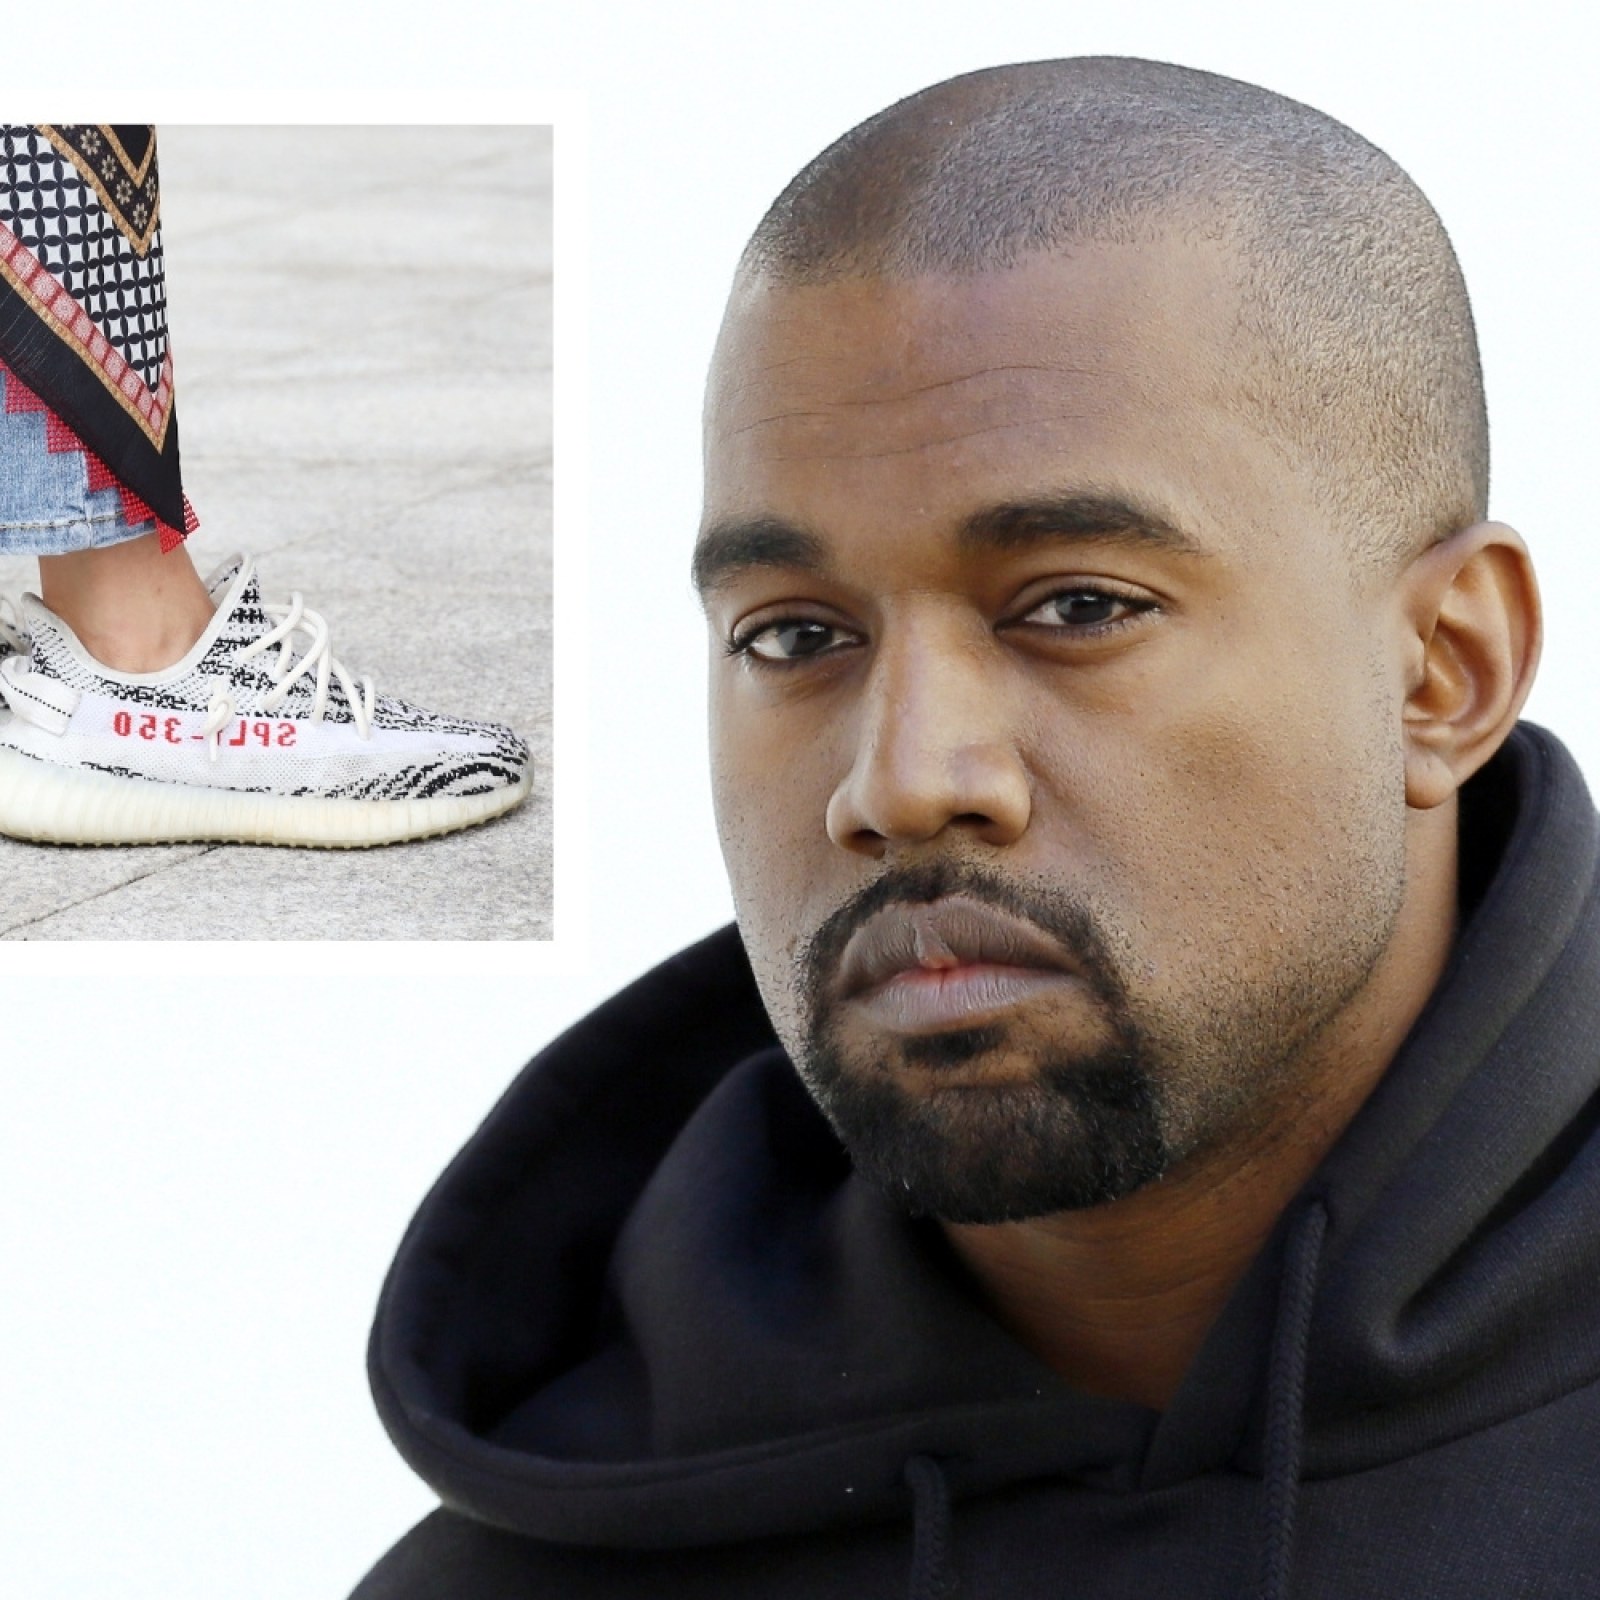 For $1 million, these Kanye West sneakers could be yours - Los